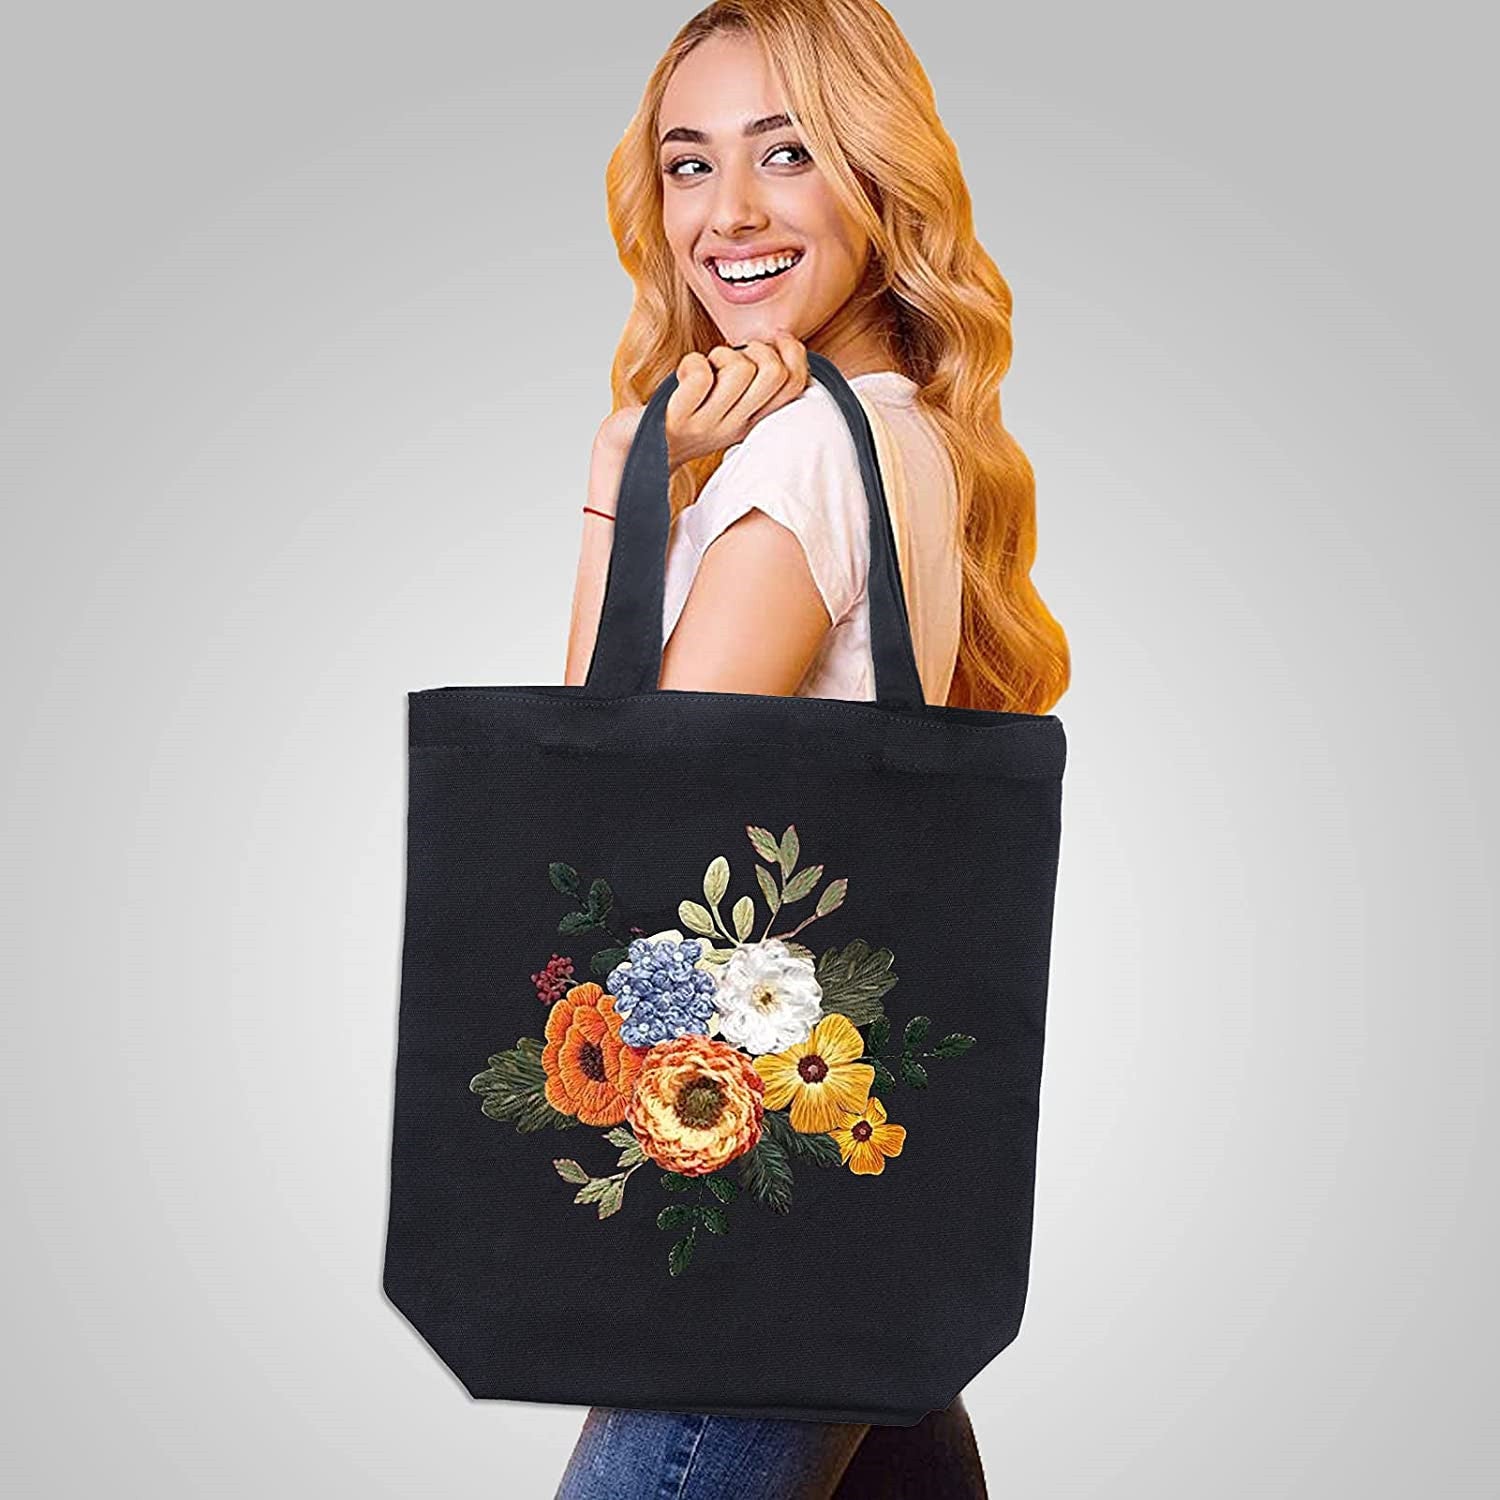 Canvas Tote Bag Embroidery Kit - 1Pcs